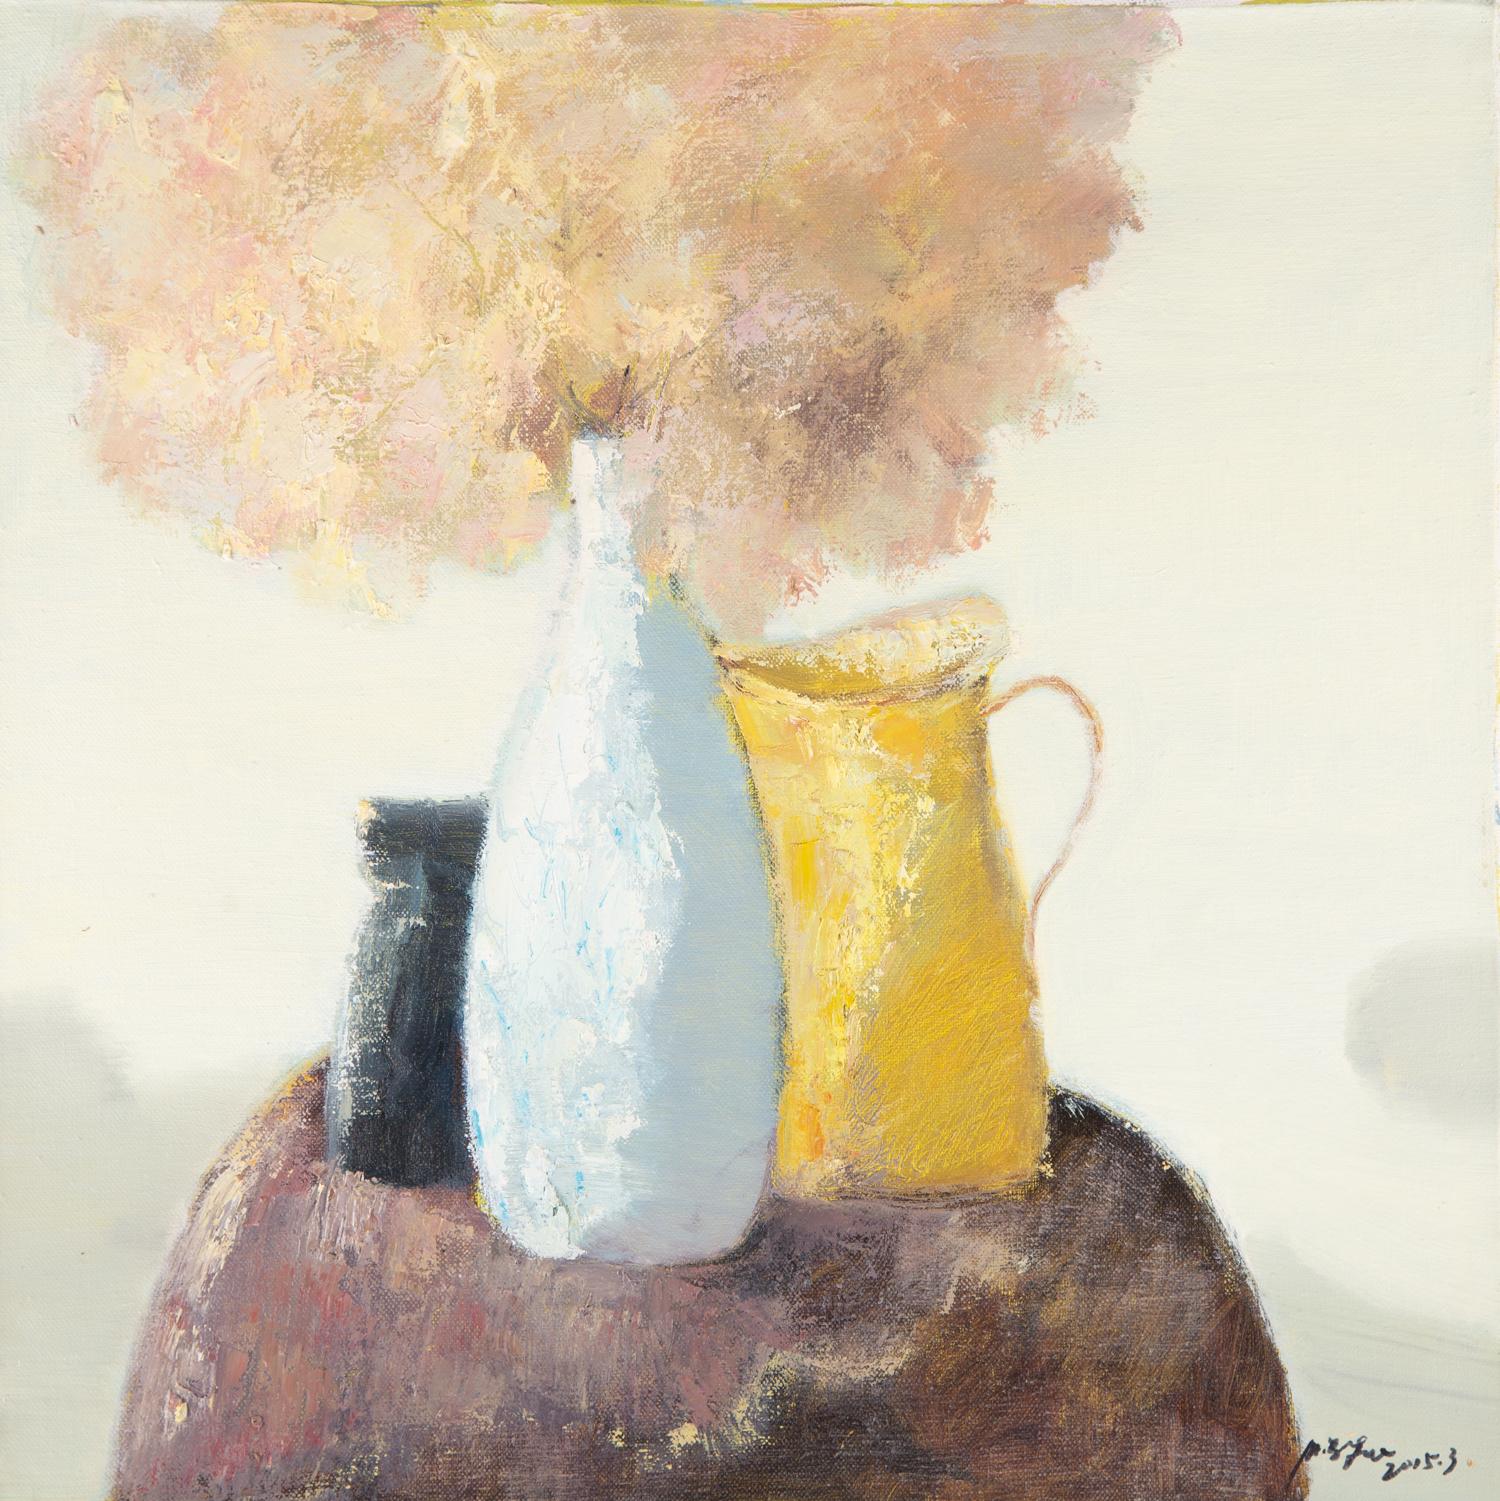 Title: Still Life-Daylight
 Medium: Oil on canvas
 Size: 15.5 x 15.5 inches
 Frame: Framing options available!
 Condition: The painting appears to be in excellent condition.
 Note: This painting is unstretched
 Year: 2015
 Artist: Pengfei Wu
